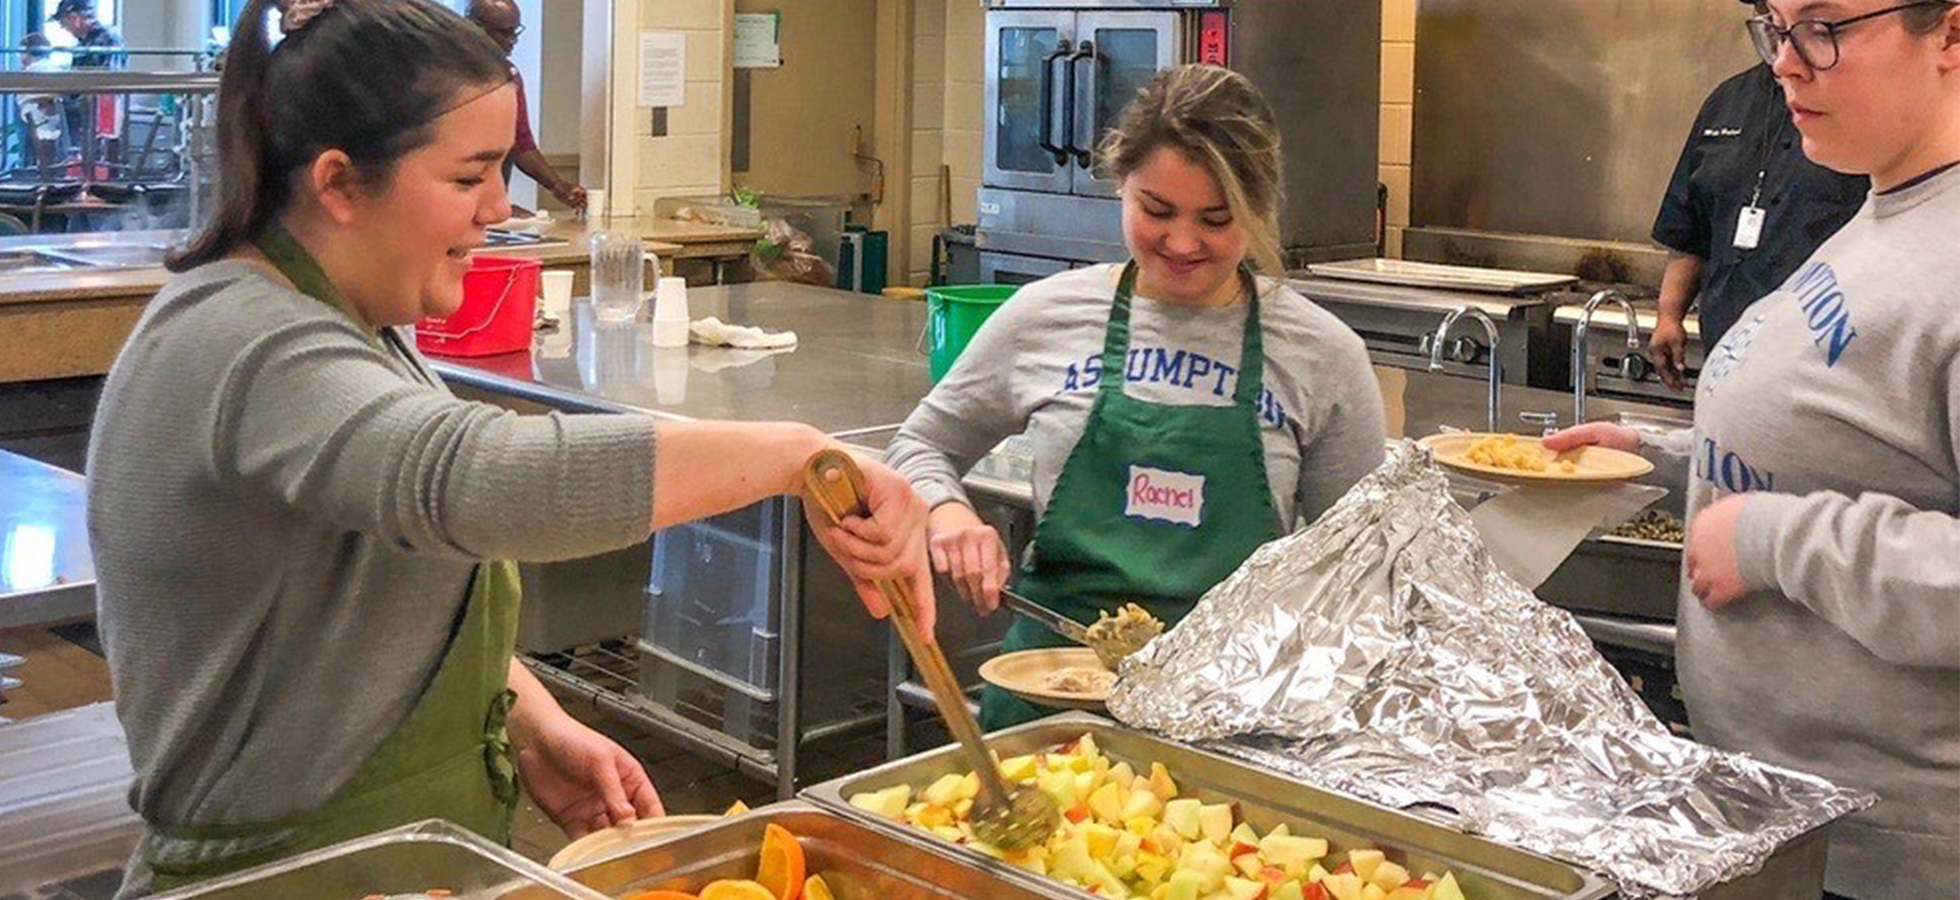 Students Forgo Winter Break to Engage in Meaningful Volunteer Efforts